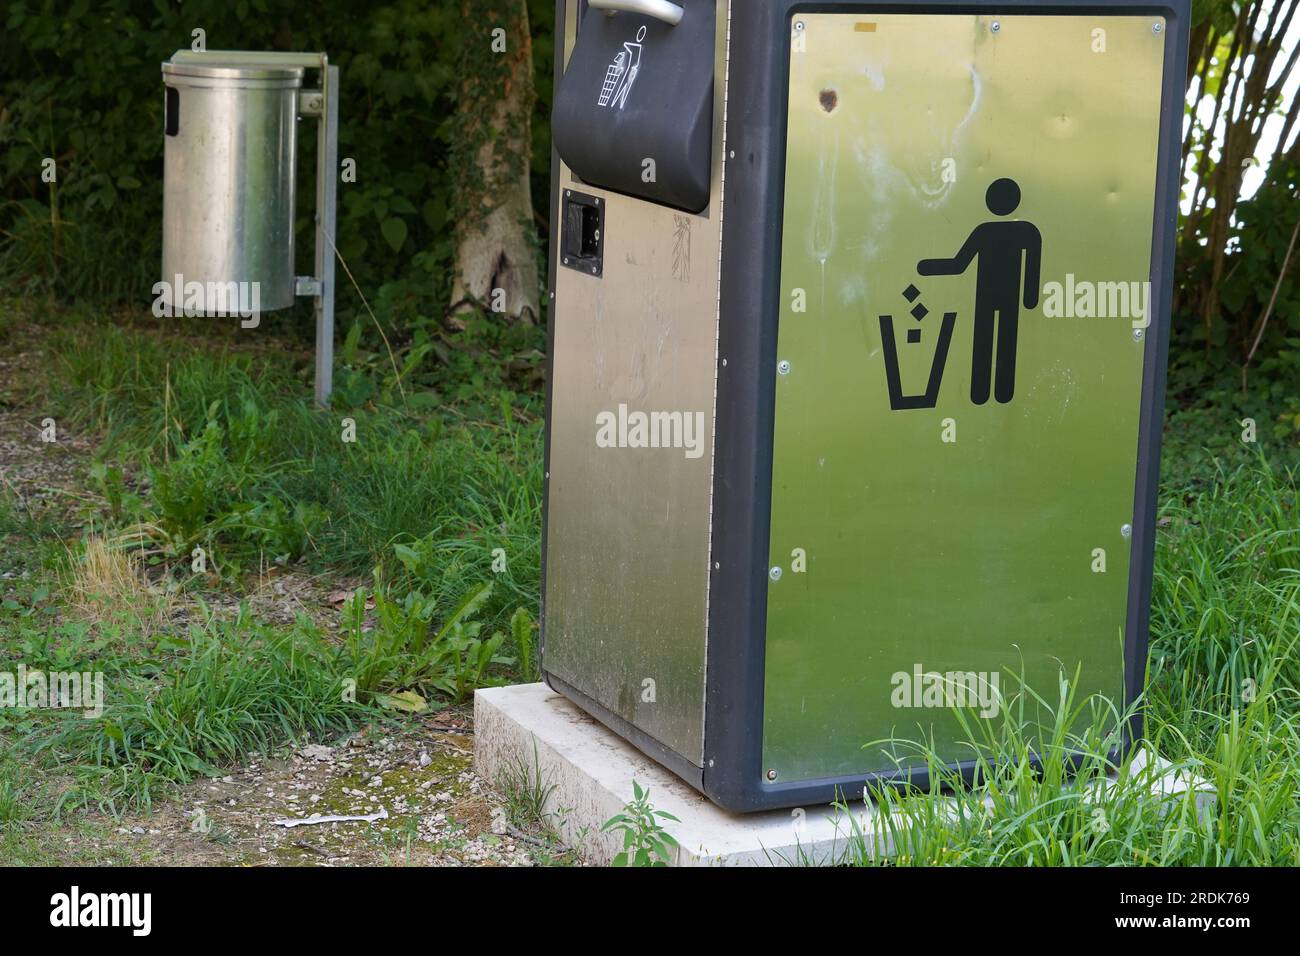 Two metal litter bins in public spaces. Stock Photo